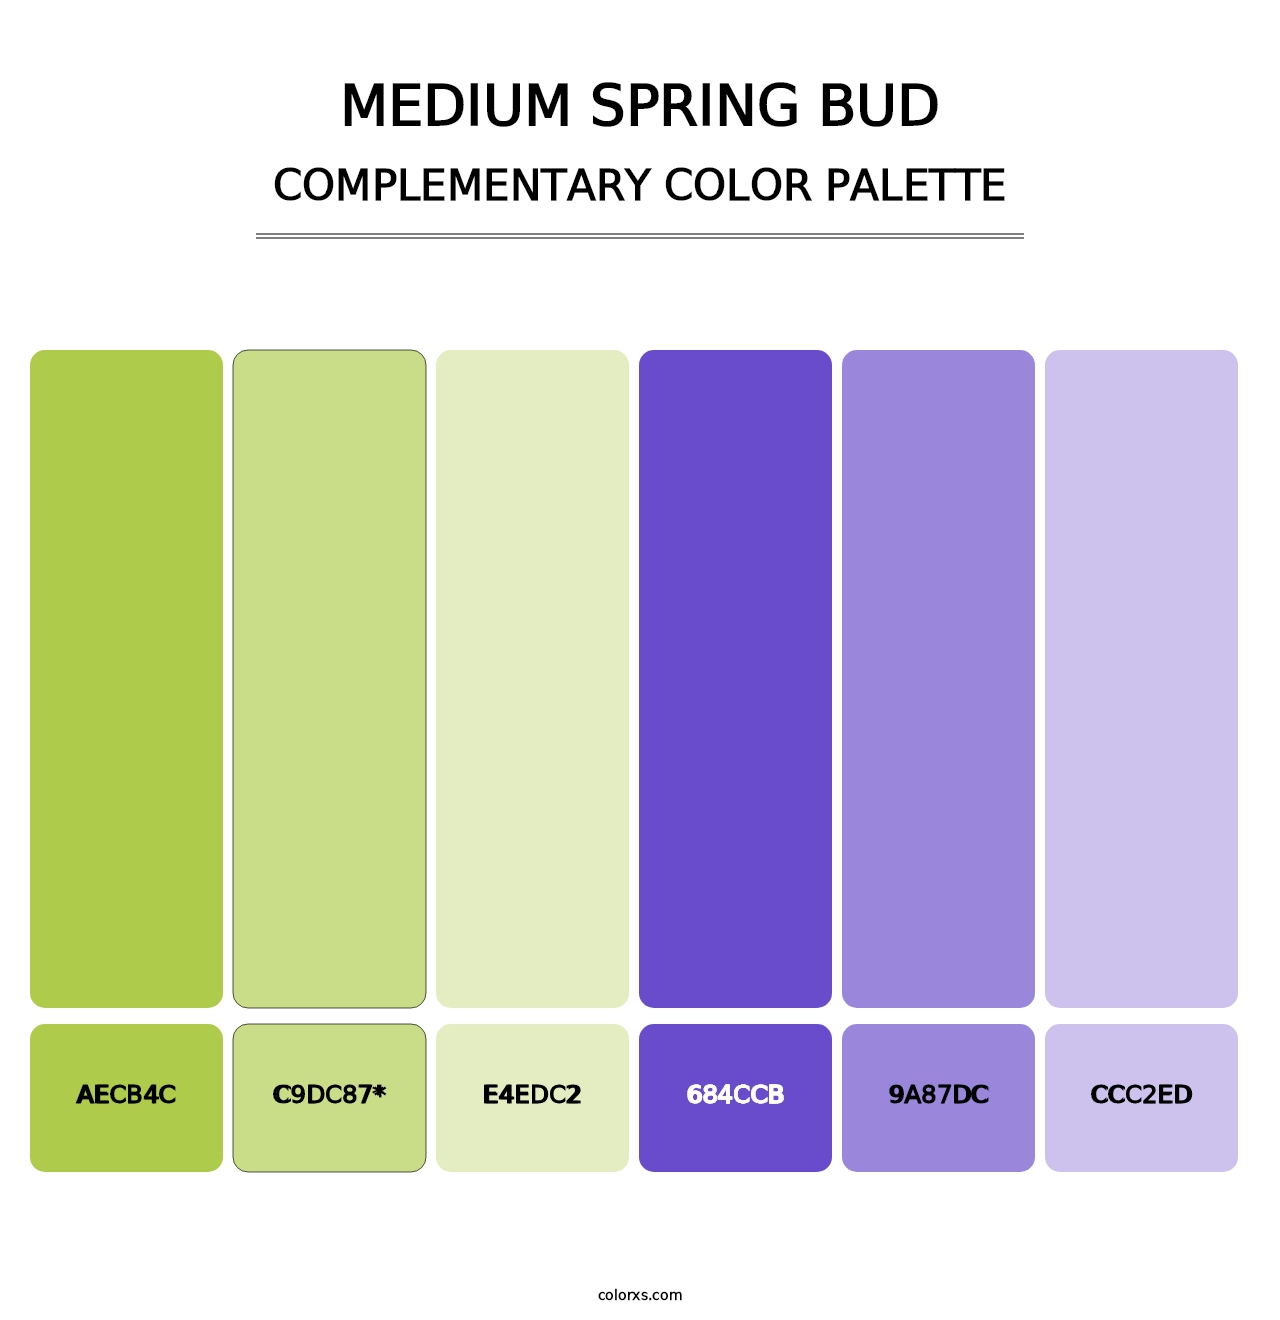 Medium Spring Bud - Complementary Color Palette